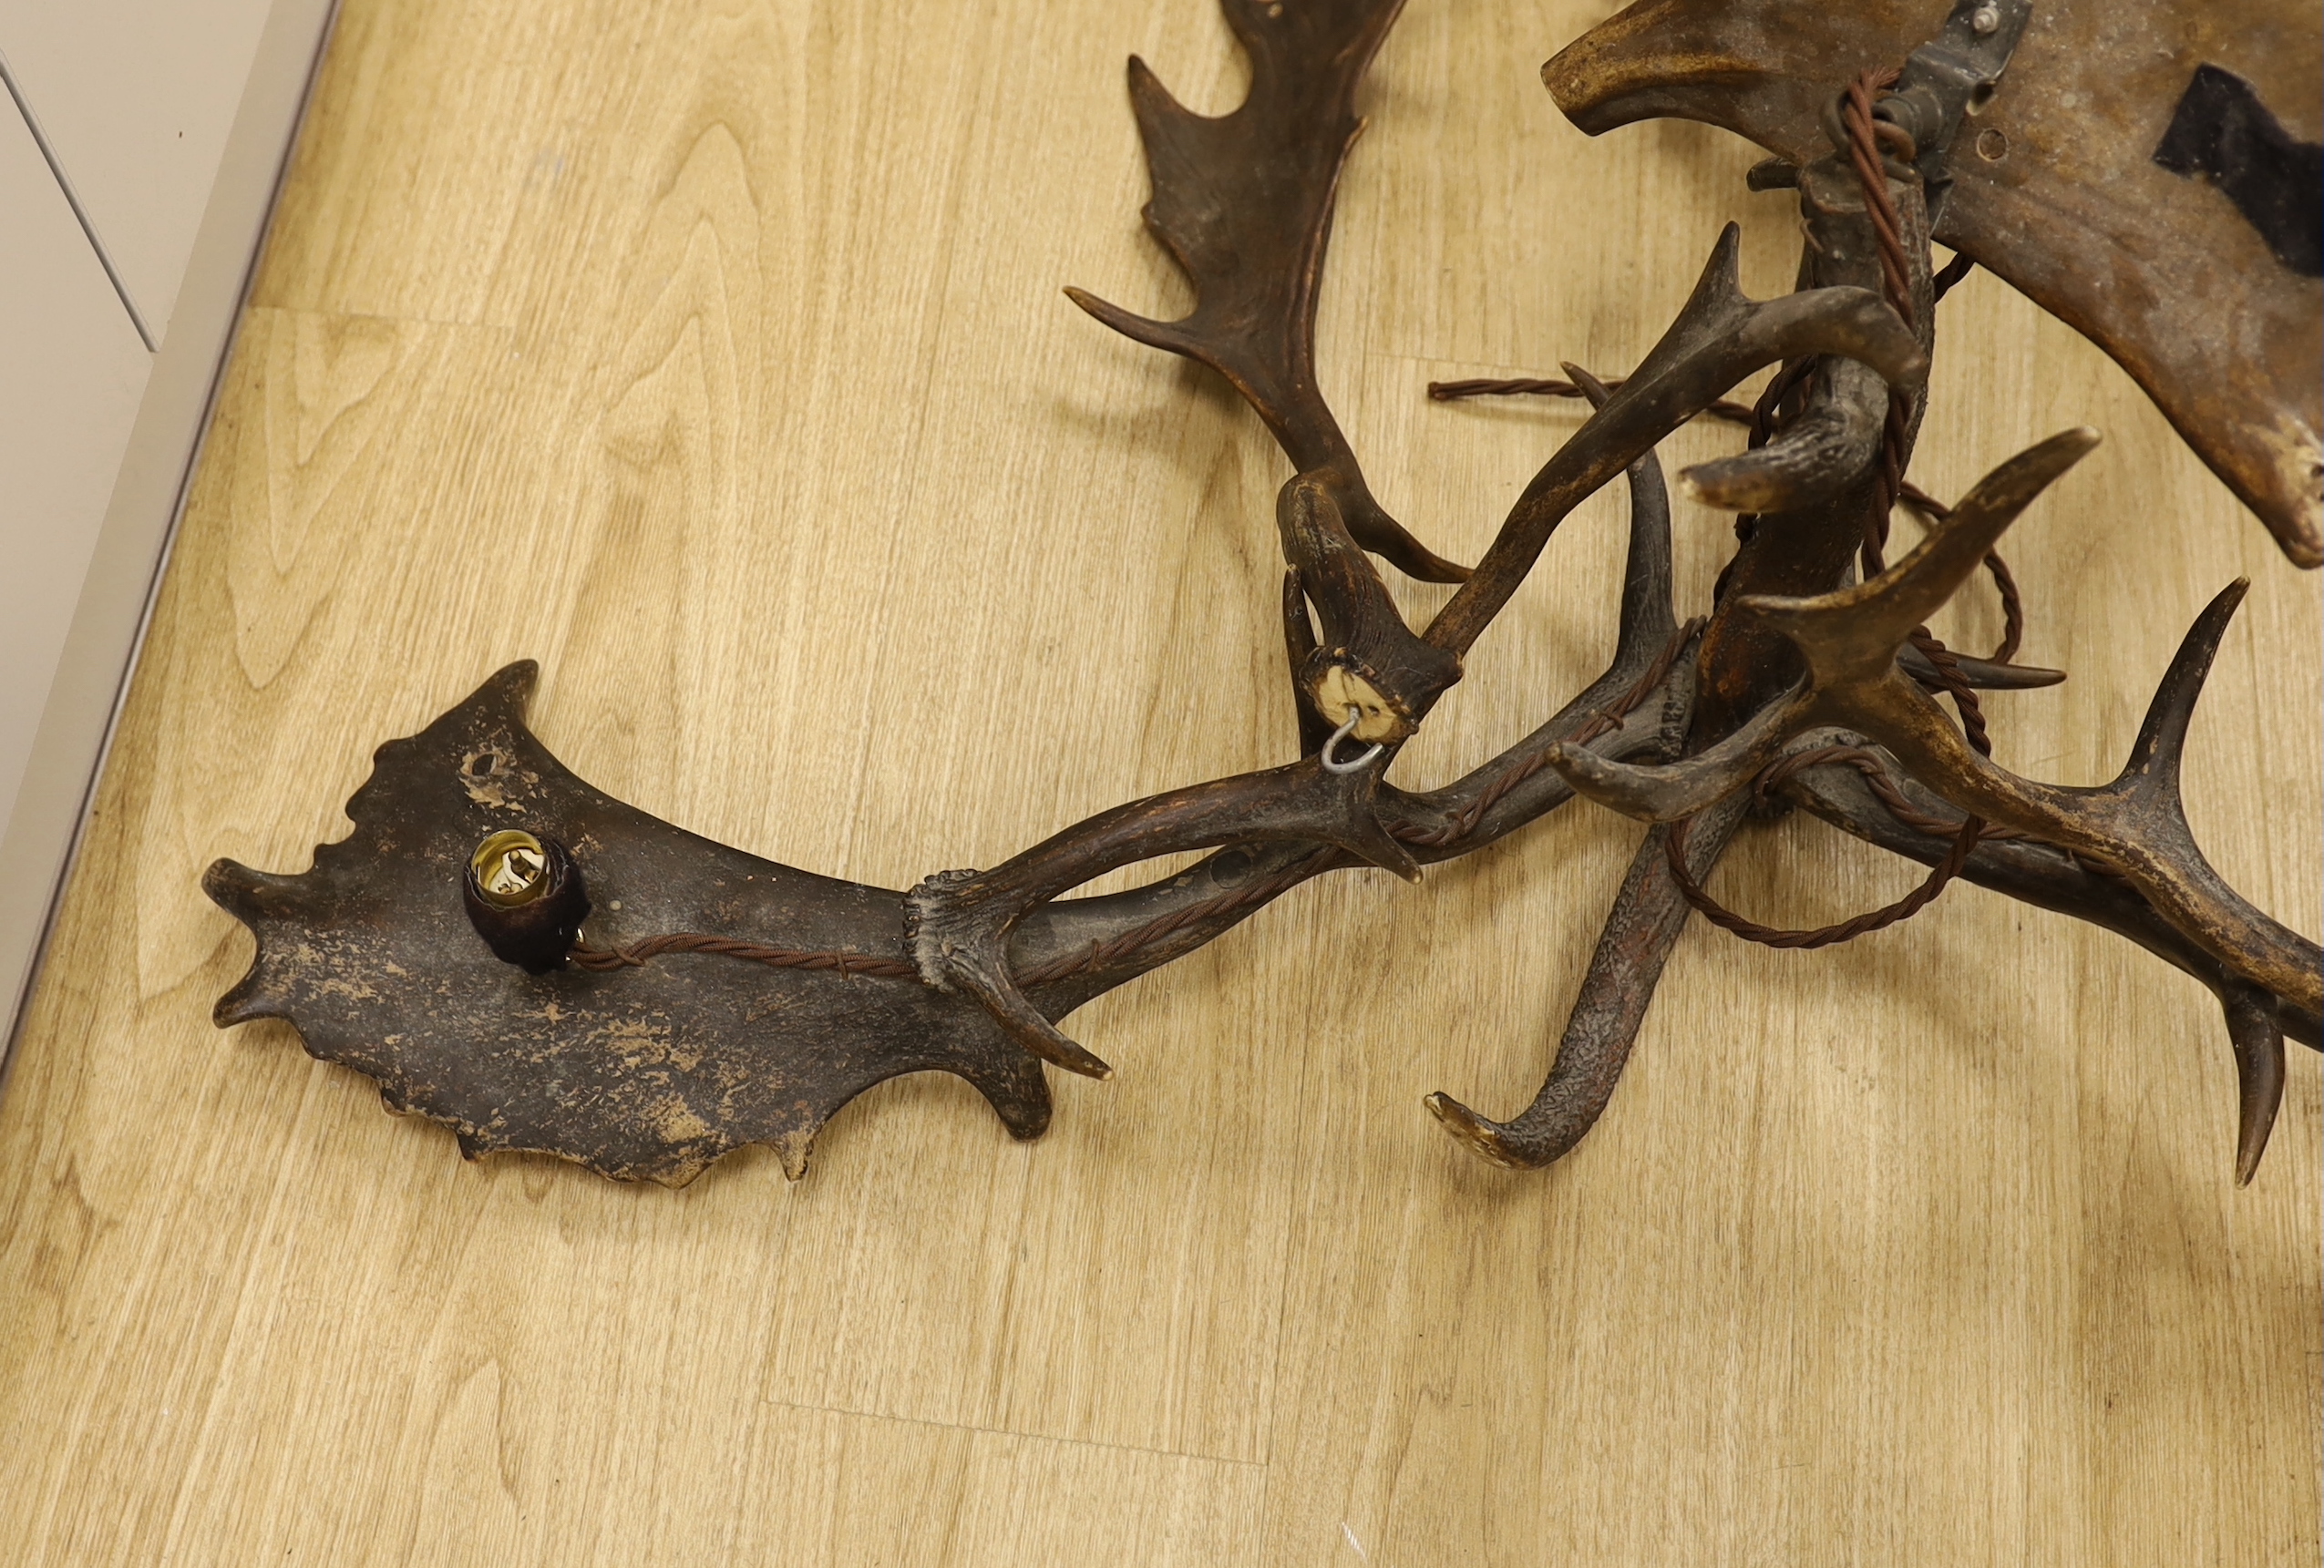 A stag antler chandelier - Image 2 of 4